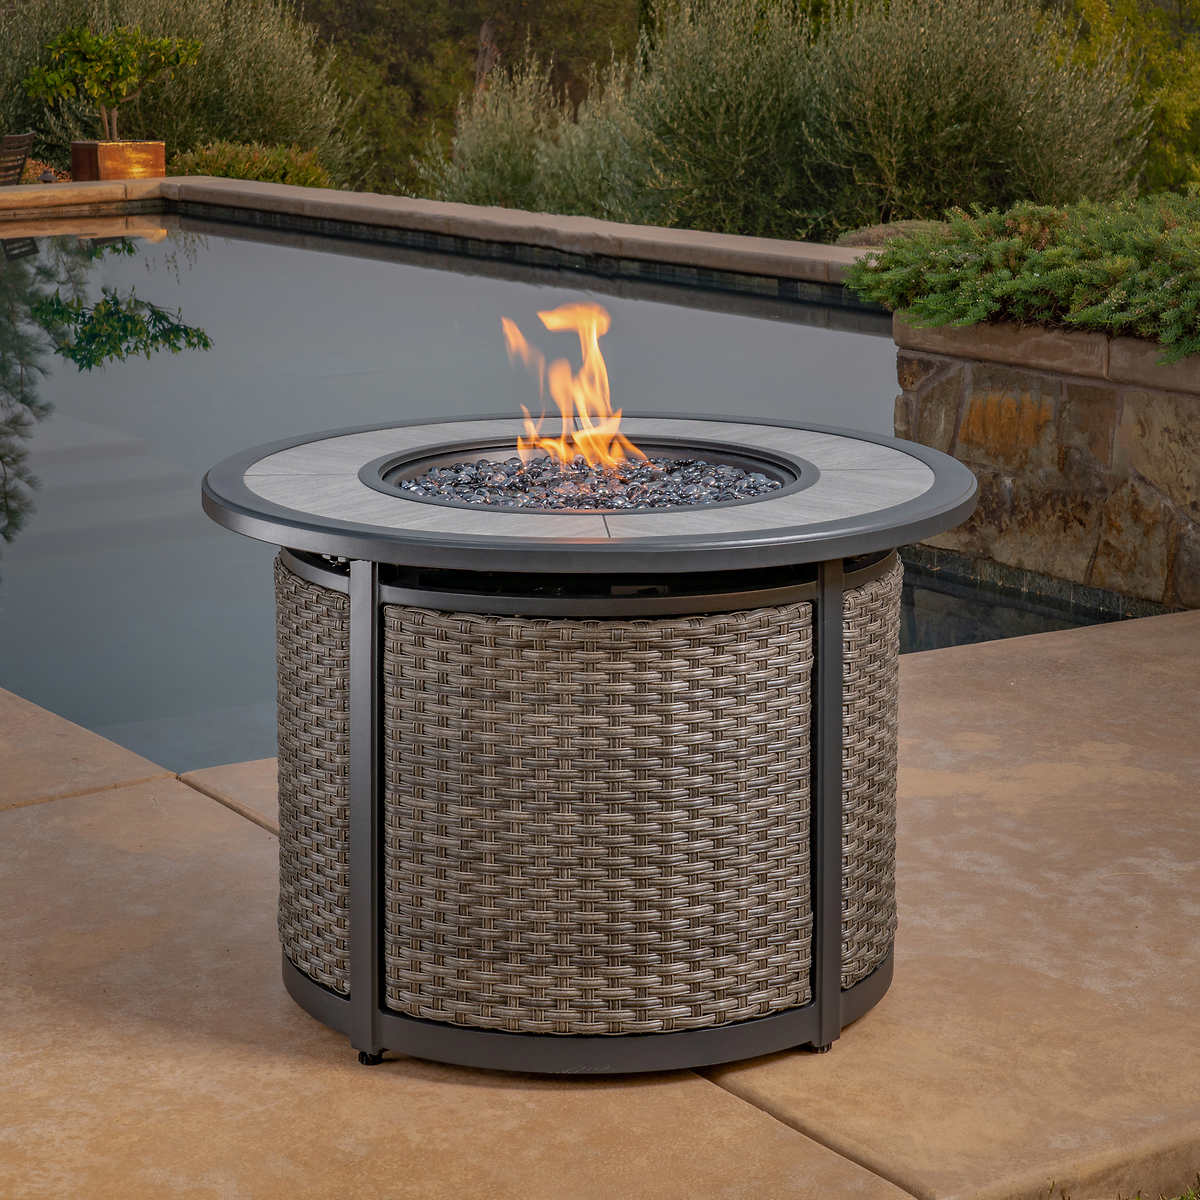 Madison Fire Pit Table Costco, Propane Fire Pit Table Reviews